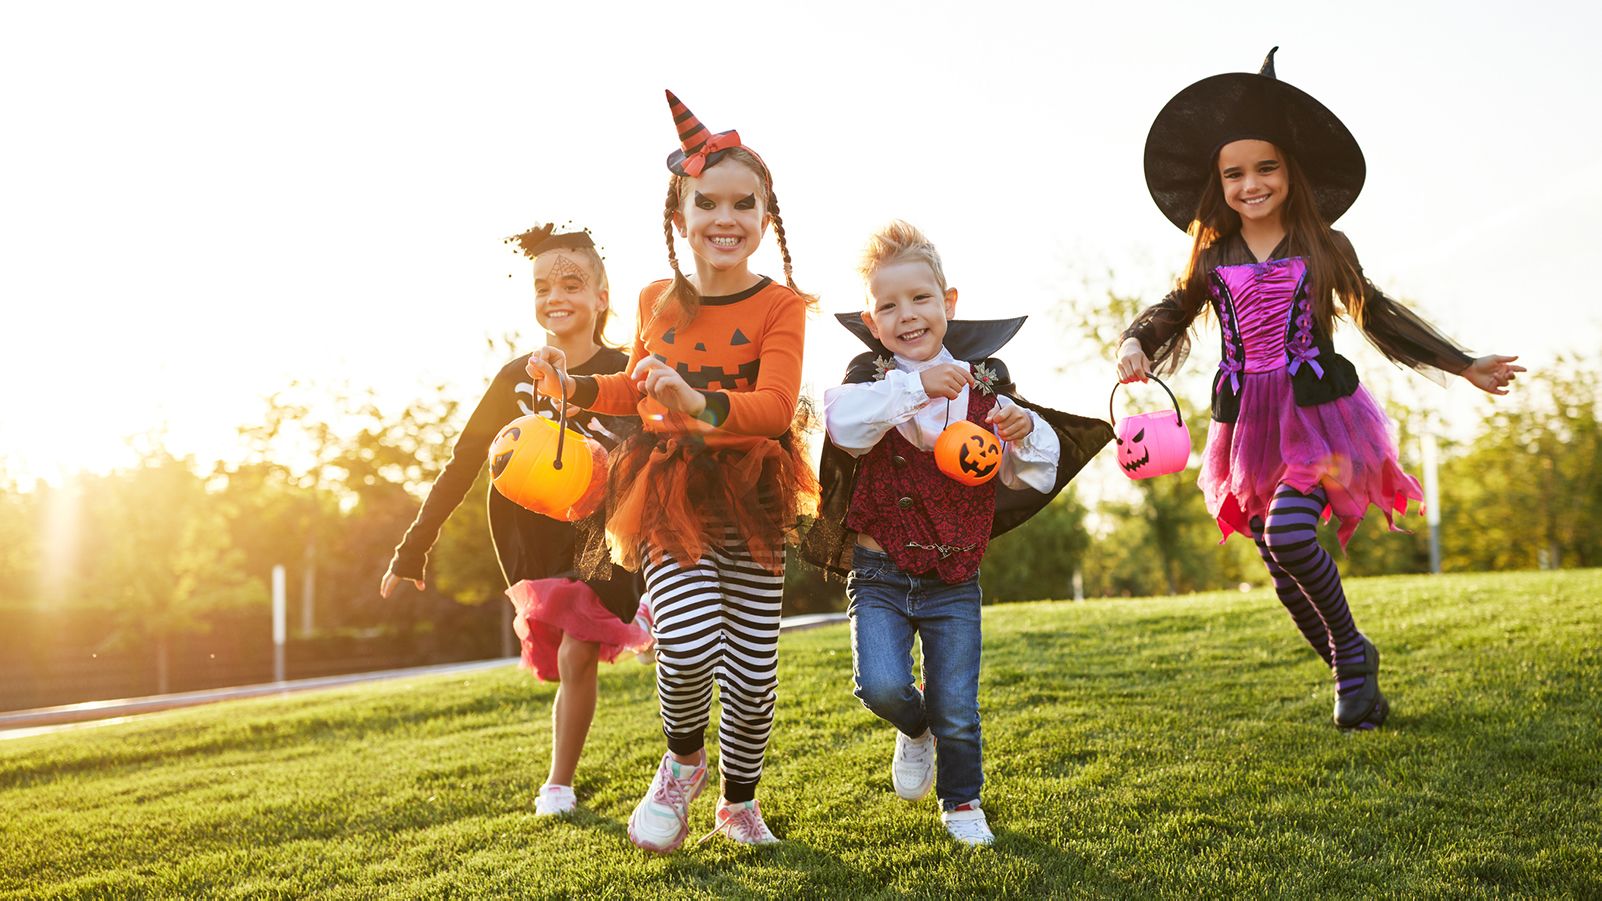 6 easy Halloween costumes on sale during October Prime Day - TheStreet